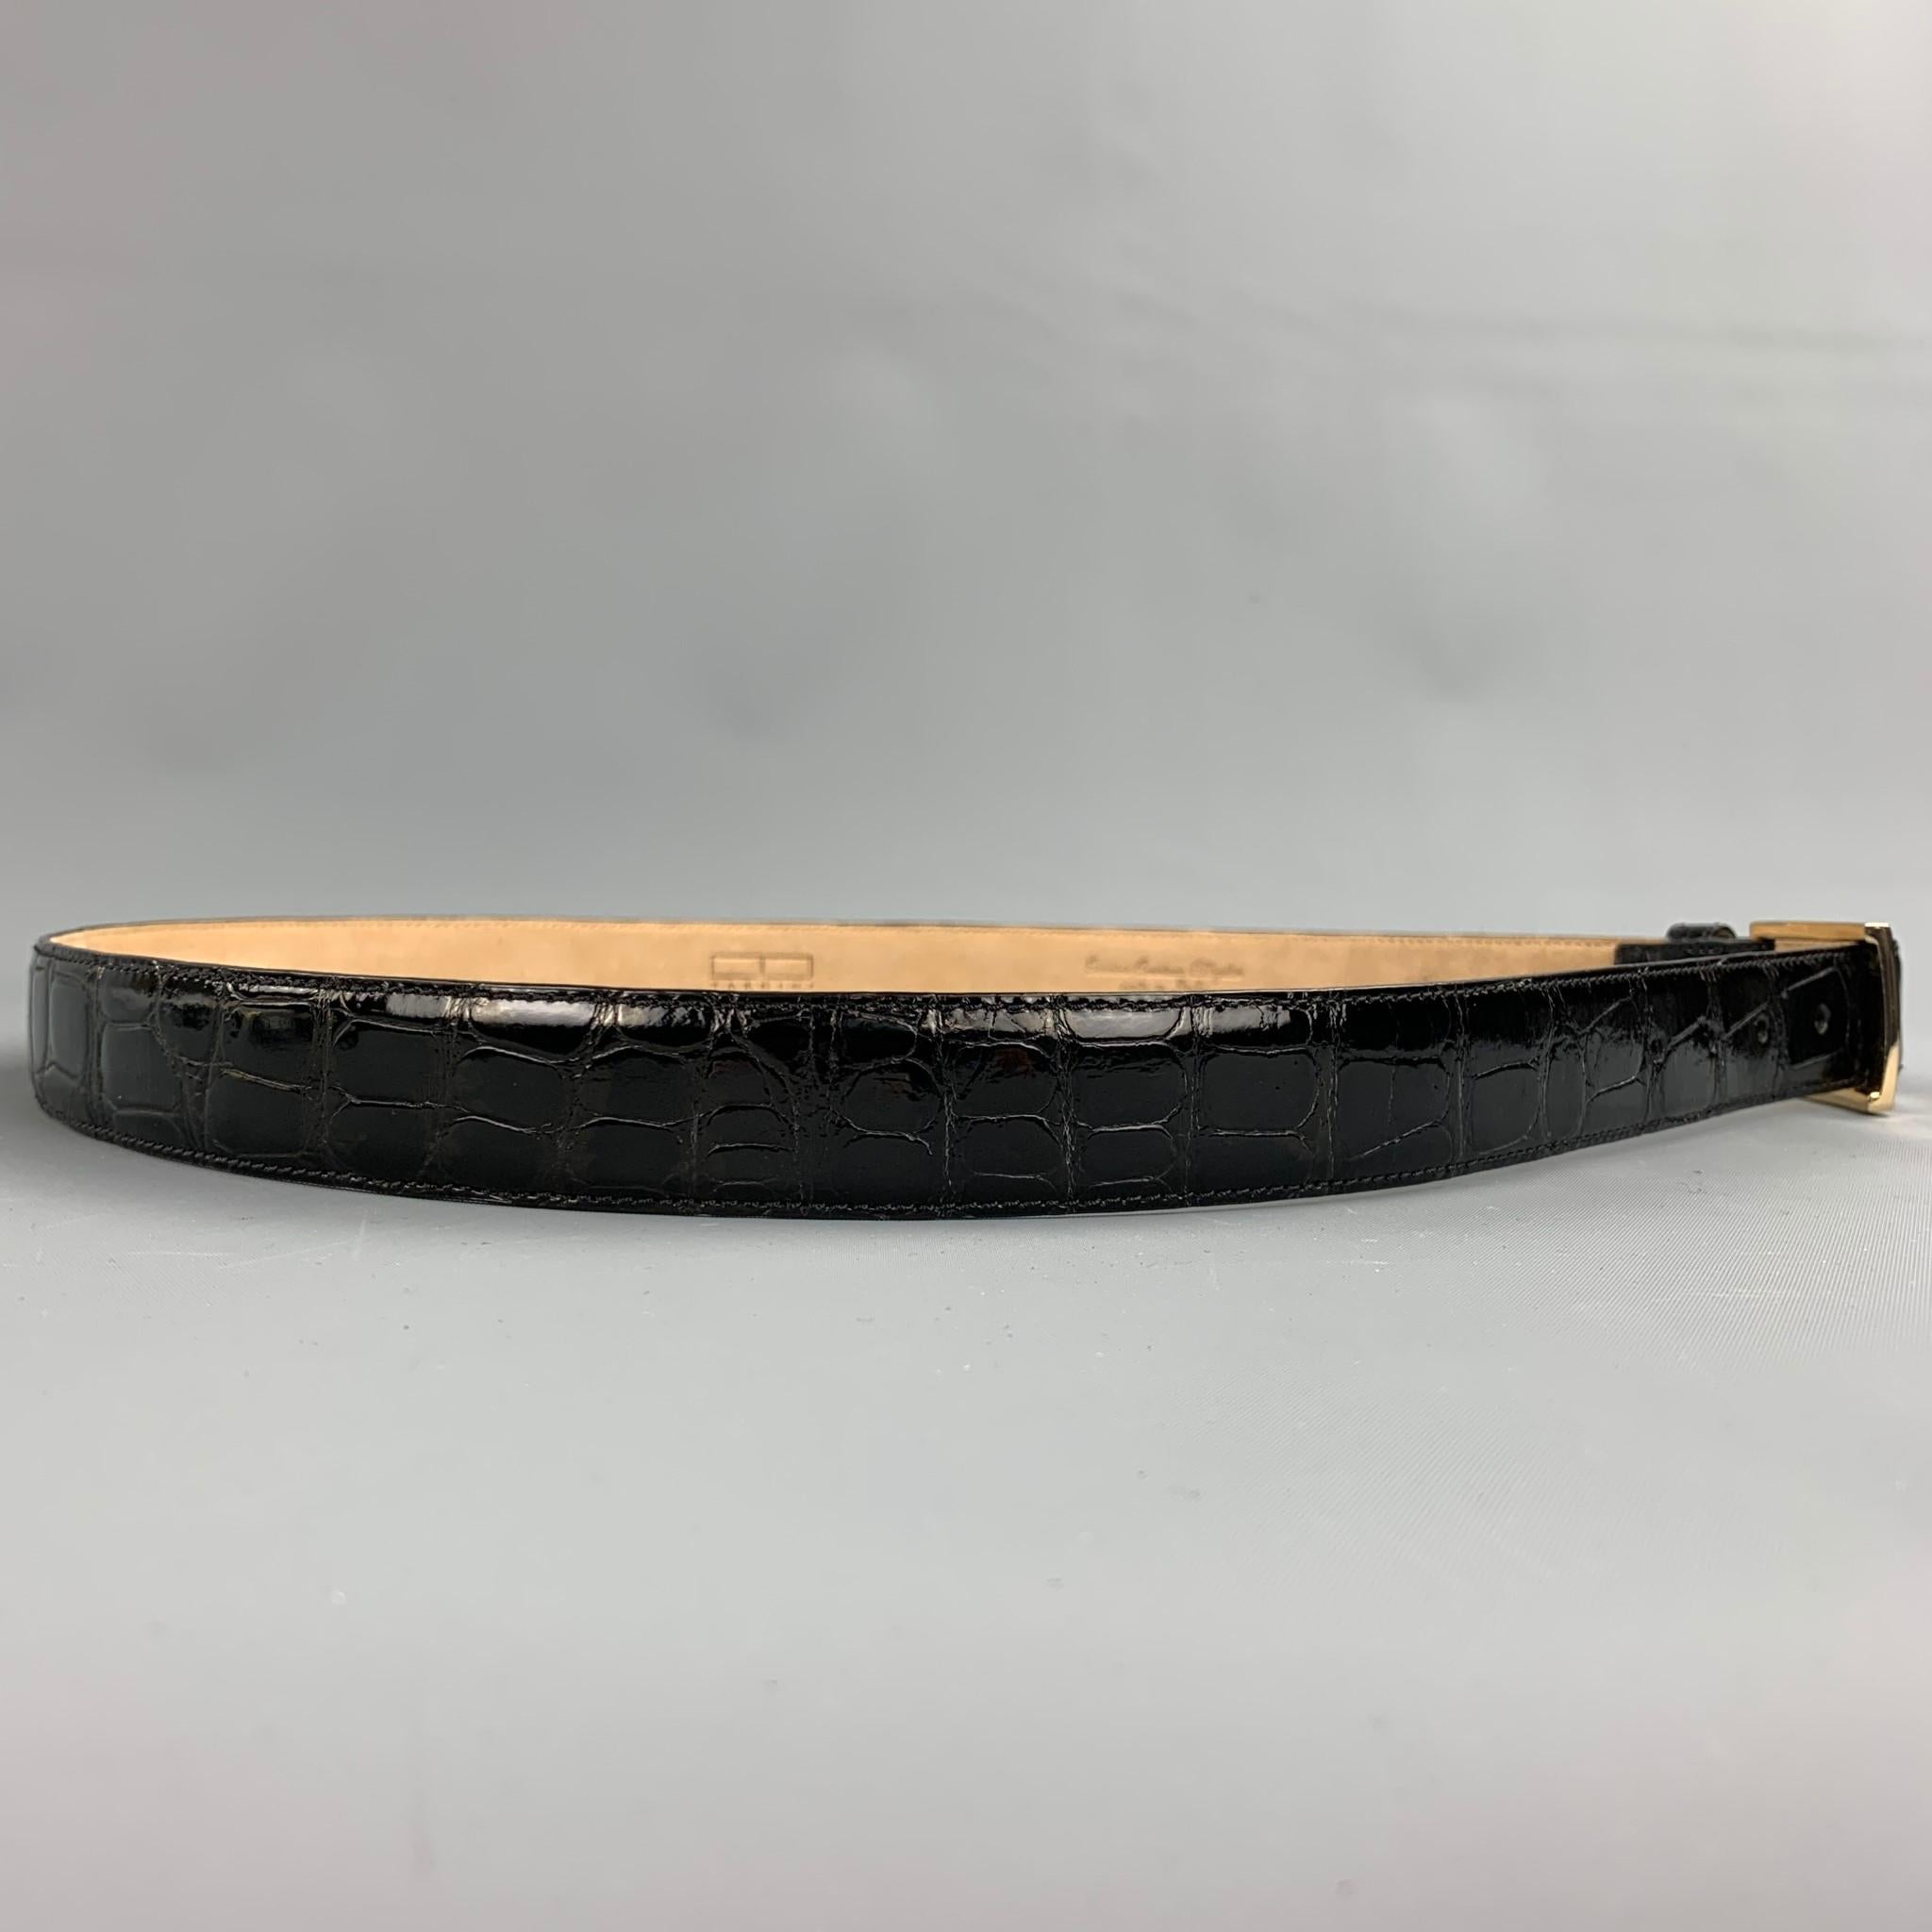 TARDINI belt comes in a black textured alligator leather featuring a gold tone buckle closure. Made in Italy.

Very Good Pre-Owned Condition.
Marked: 40/100
Original Retail Price: $850.00

Length: 47 in. 
Width: 1 in. 
Fits: 37 in. - 41 in. 
Buckle: